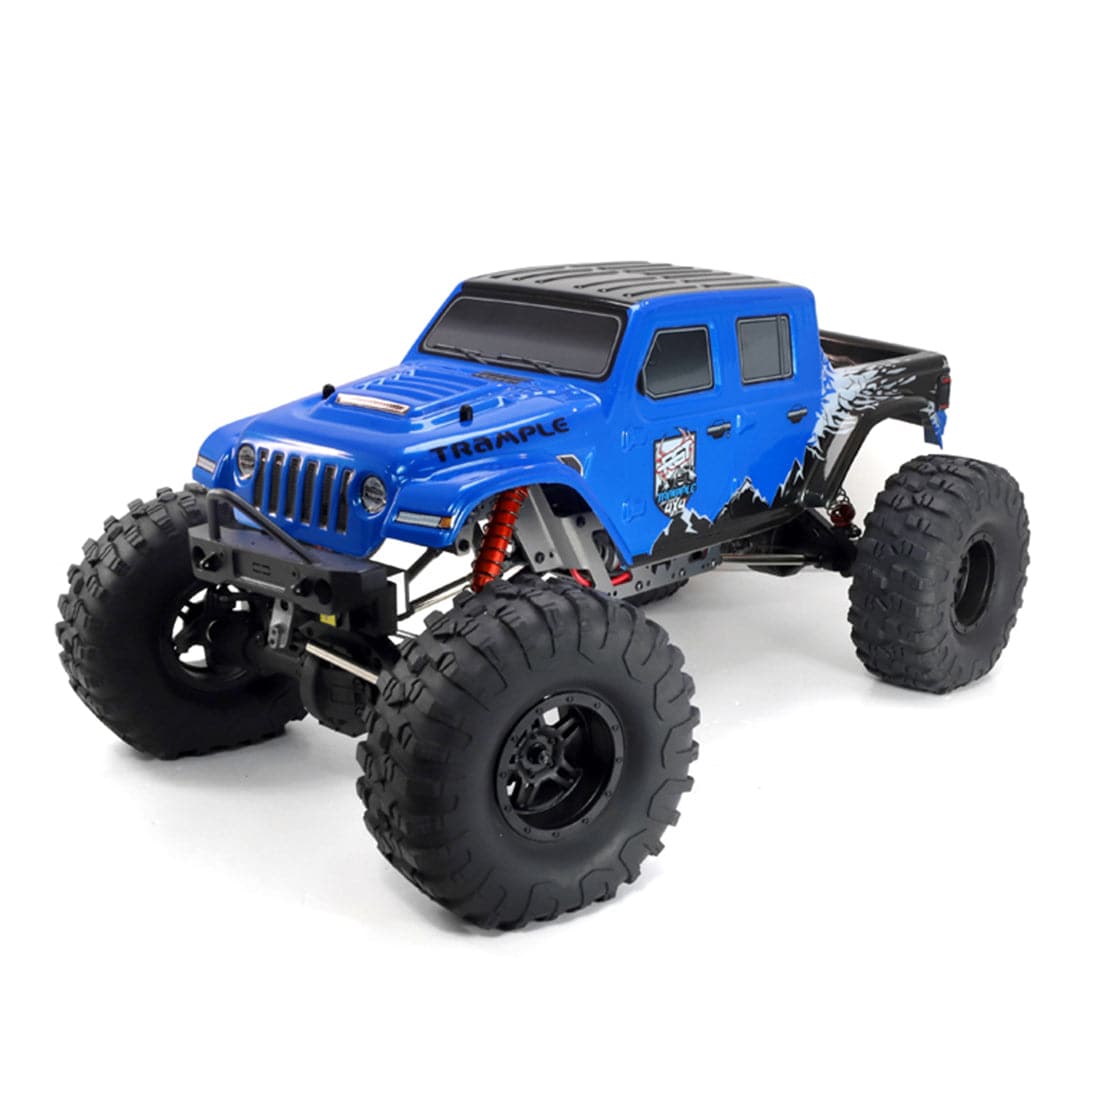 RGT 18100 TRAMPLE 1/10 2.4G 4WD RC Rock Crawler Electric Off Road